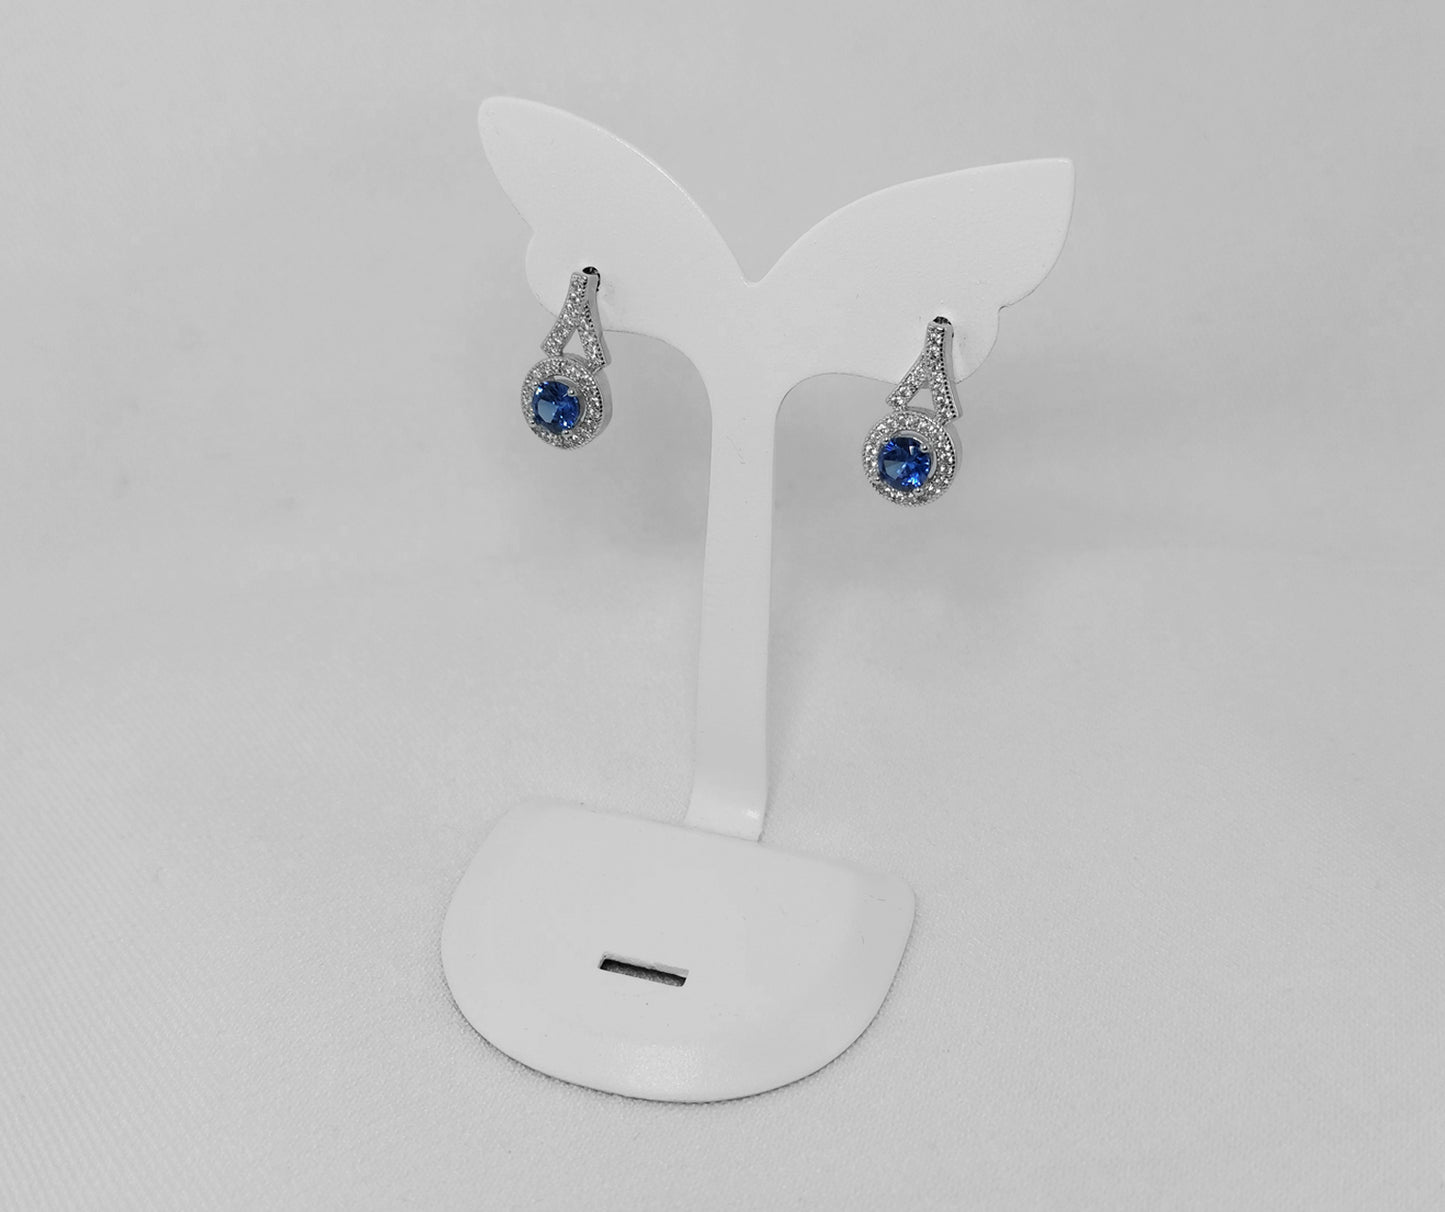 Sterling Silver Earrings with a Violet Cubic Zirconia